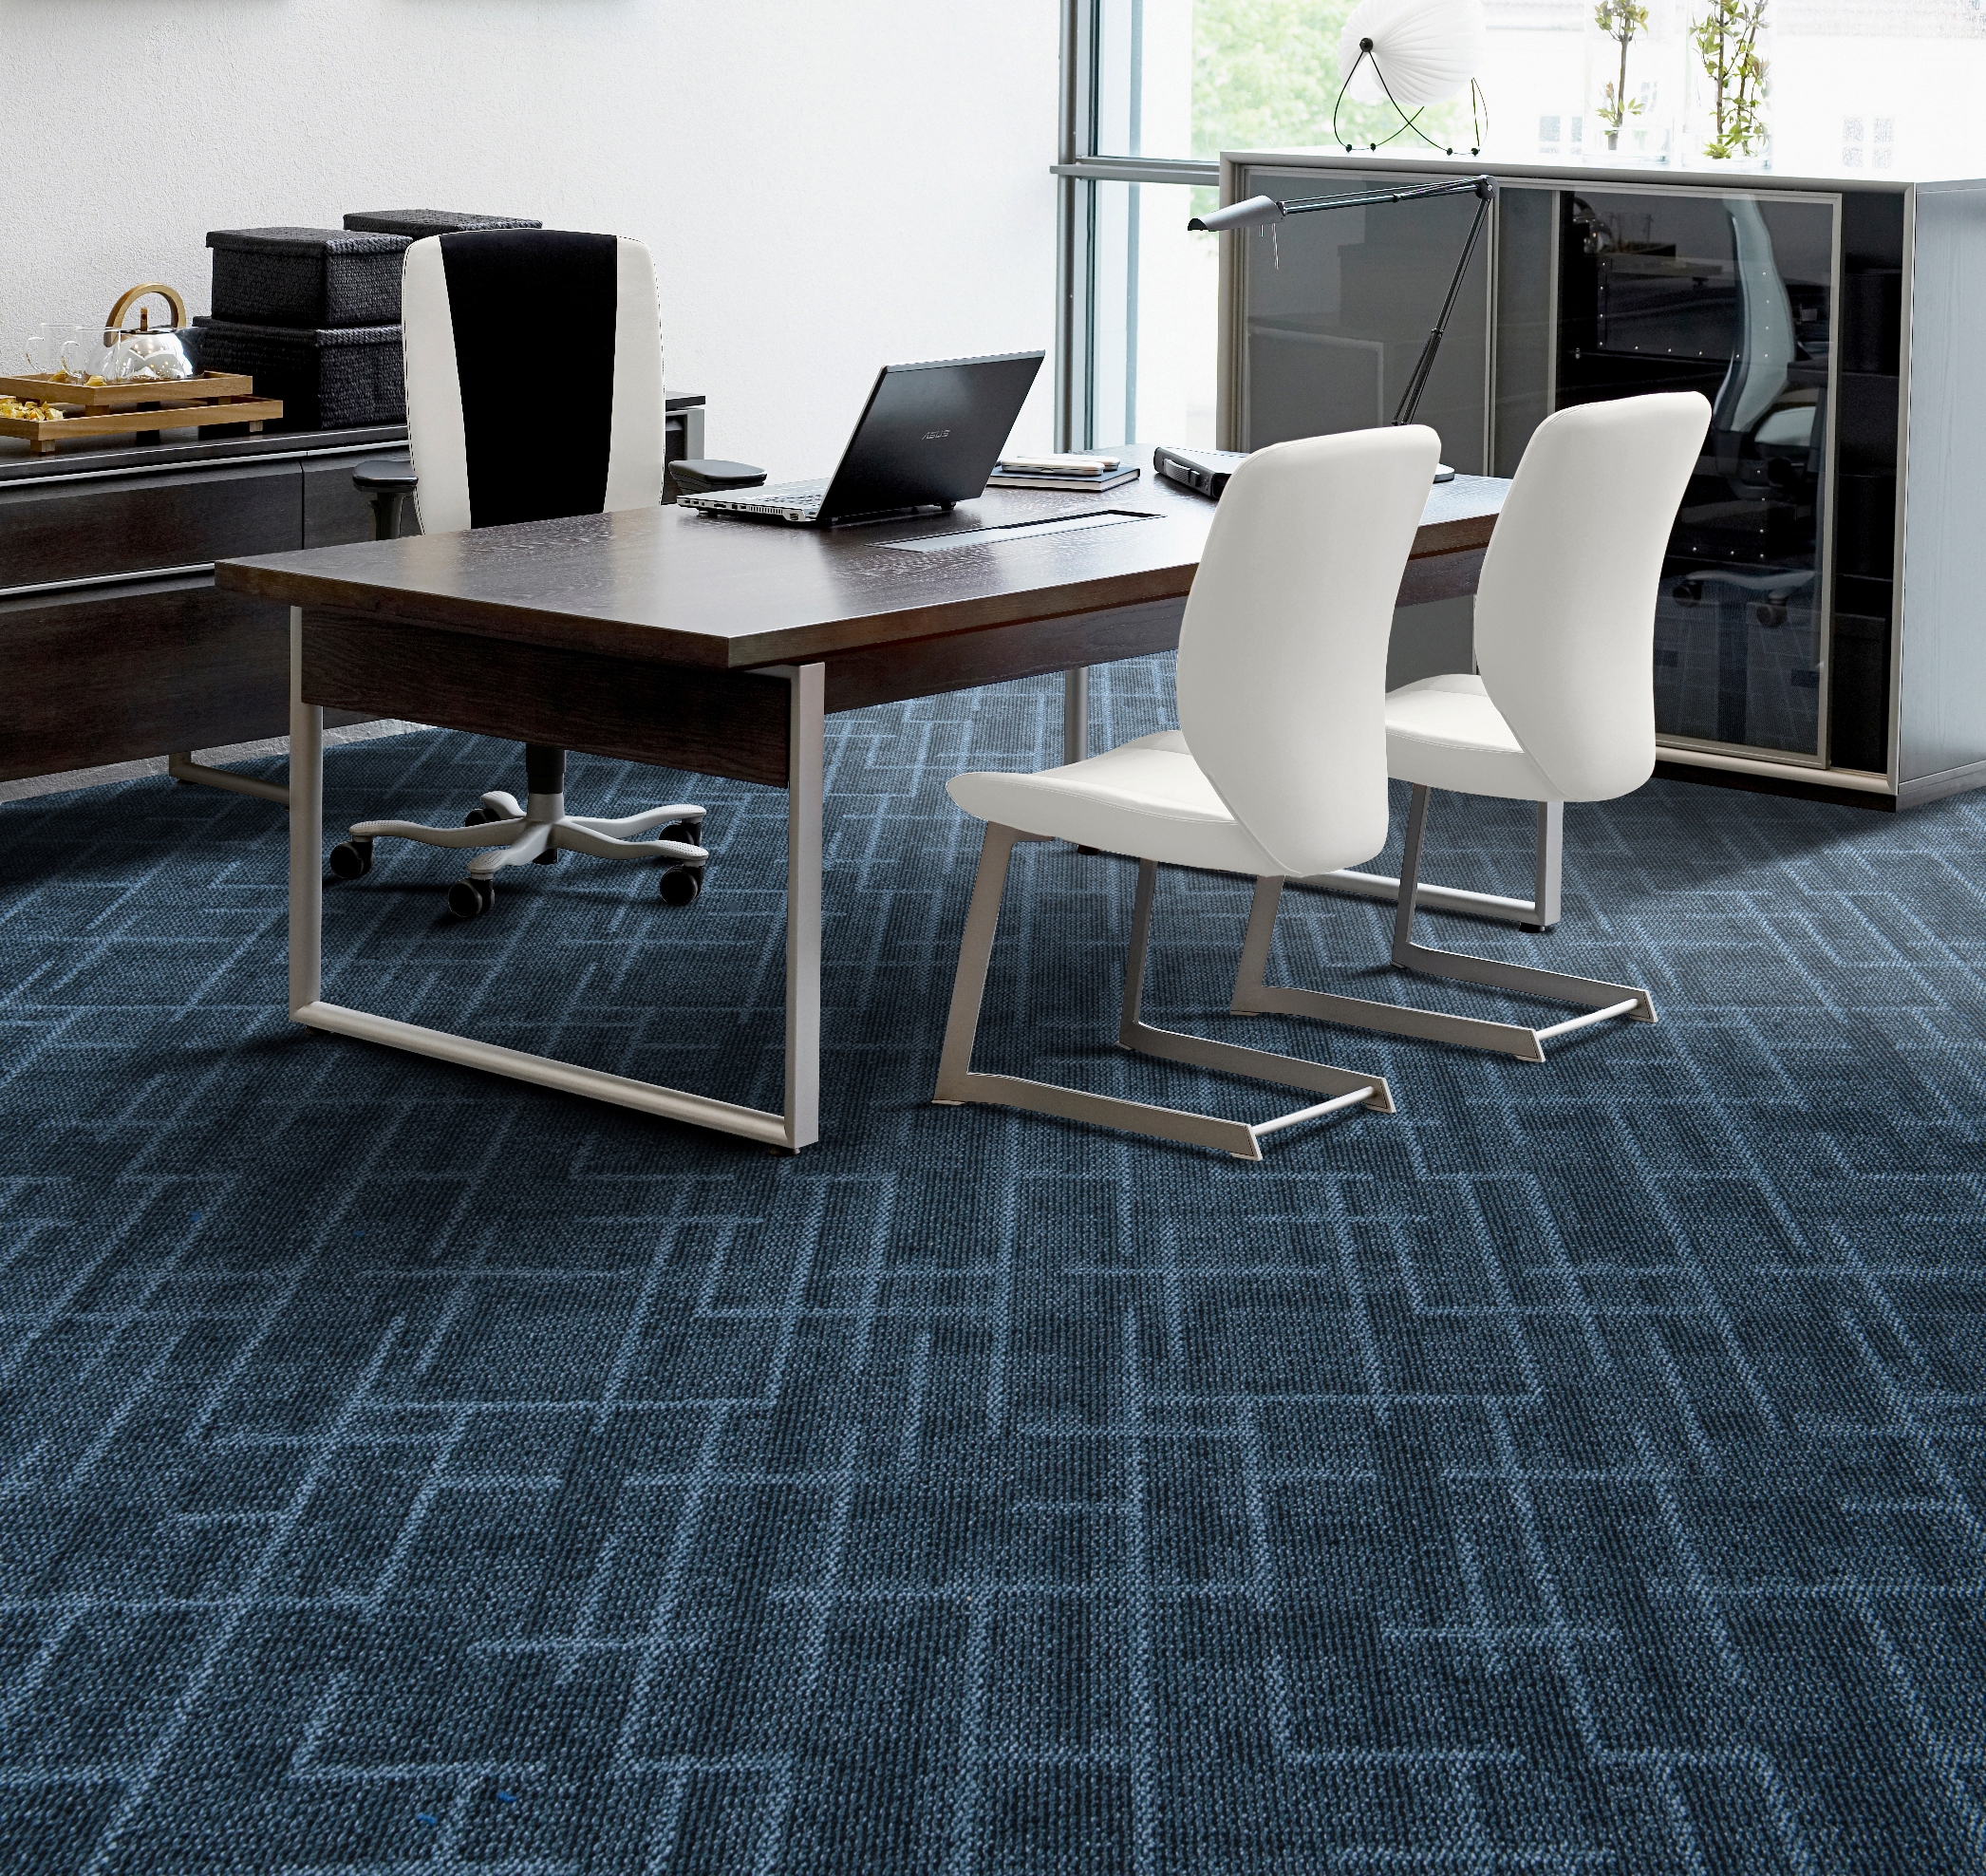 Things to consider while selecting an office carpet